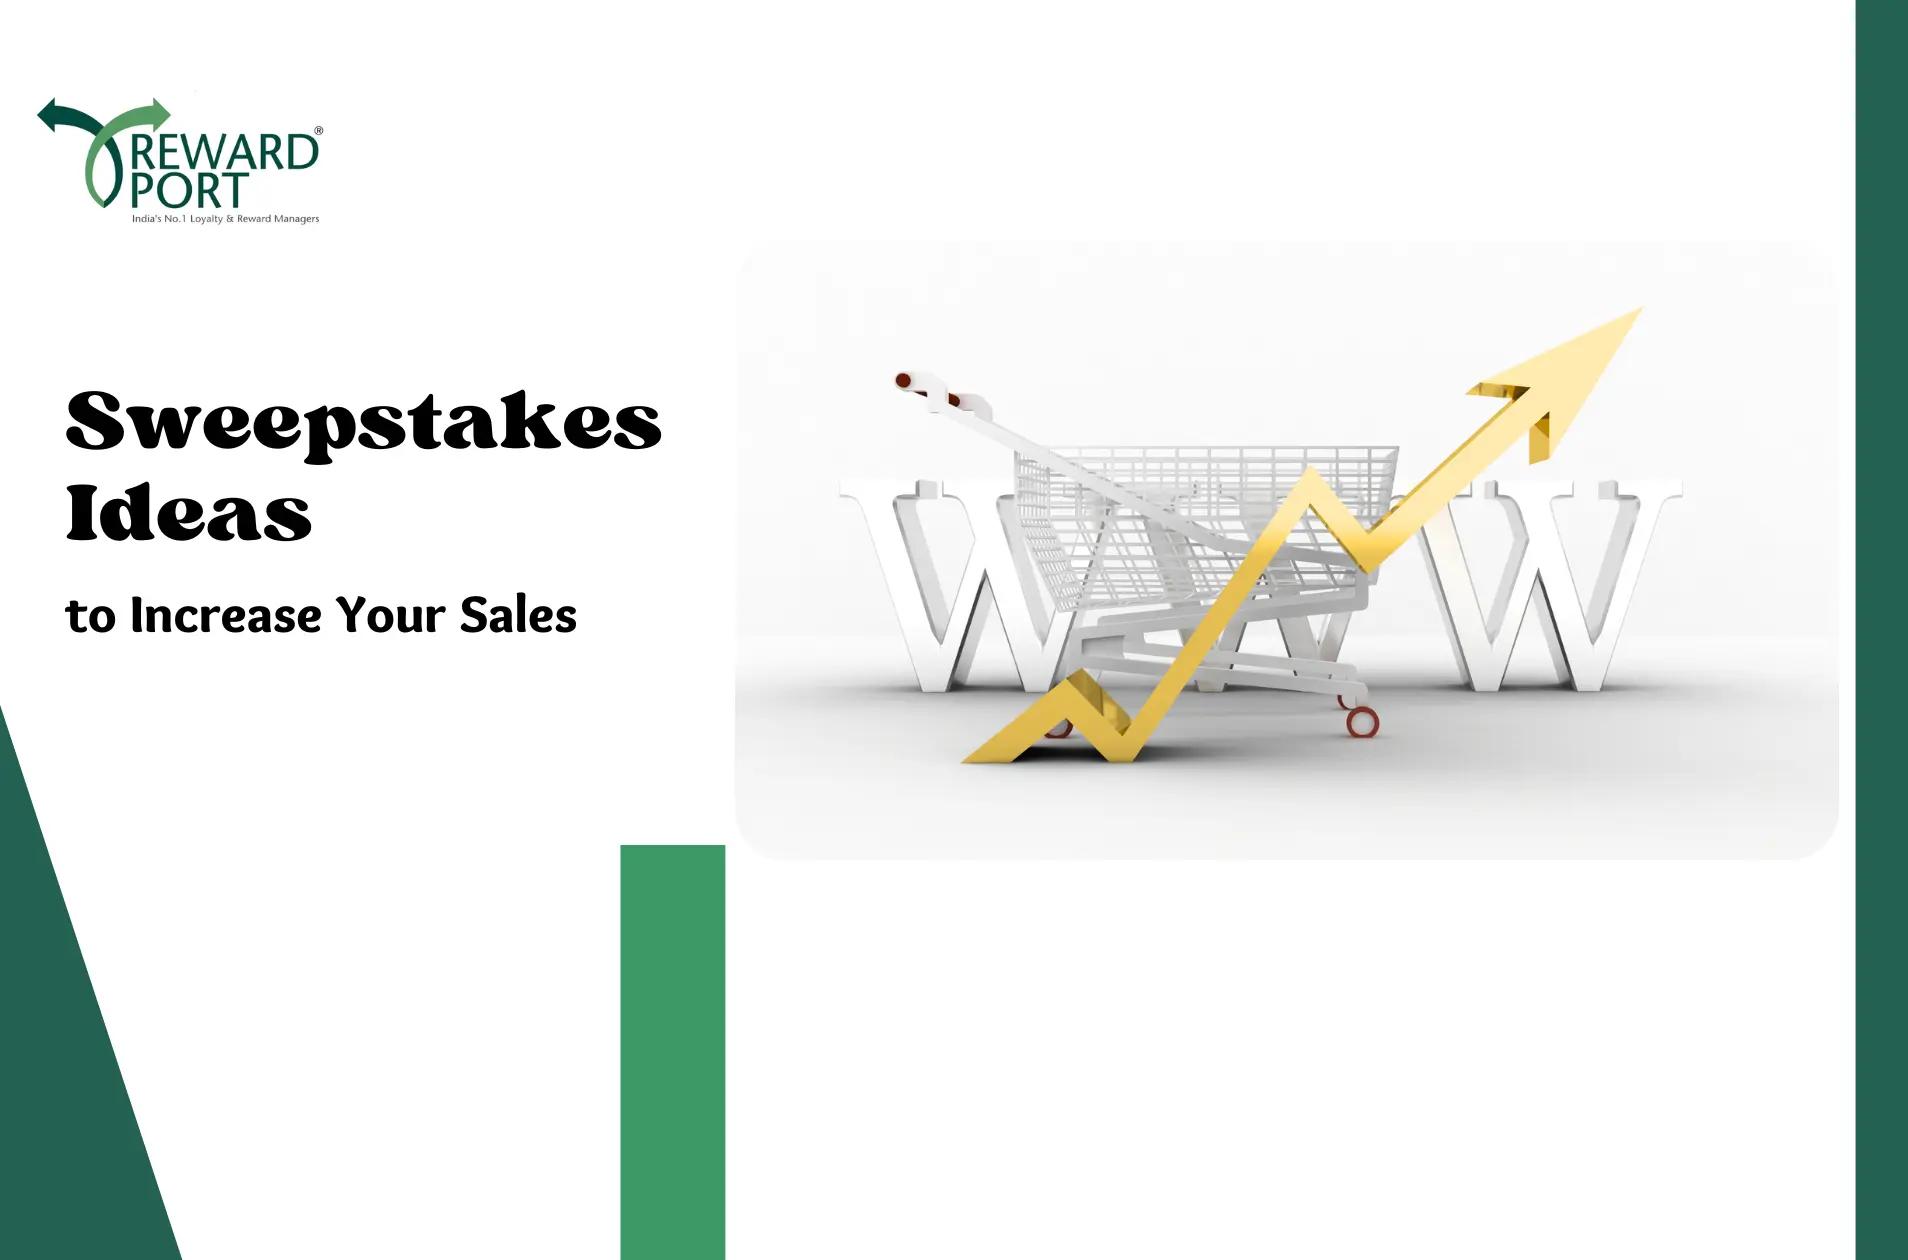 Sweepstakes Ideas to Increase Your Sales